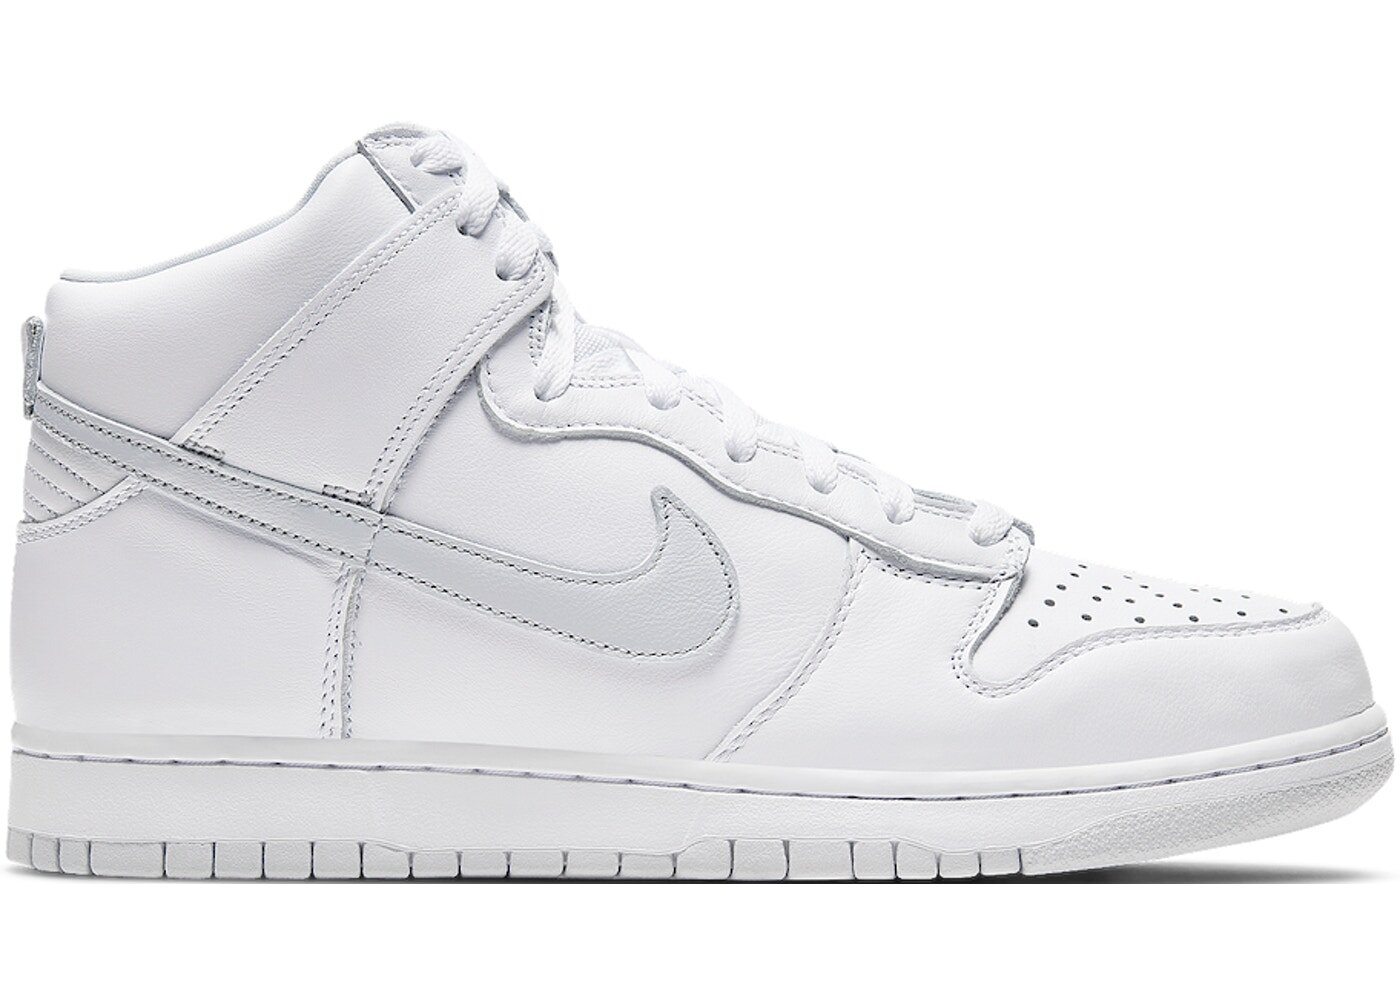 Now Available: Nike Dunk High SP "Pure Platinum" — Sneaker Shouts